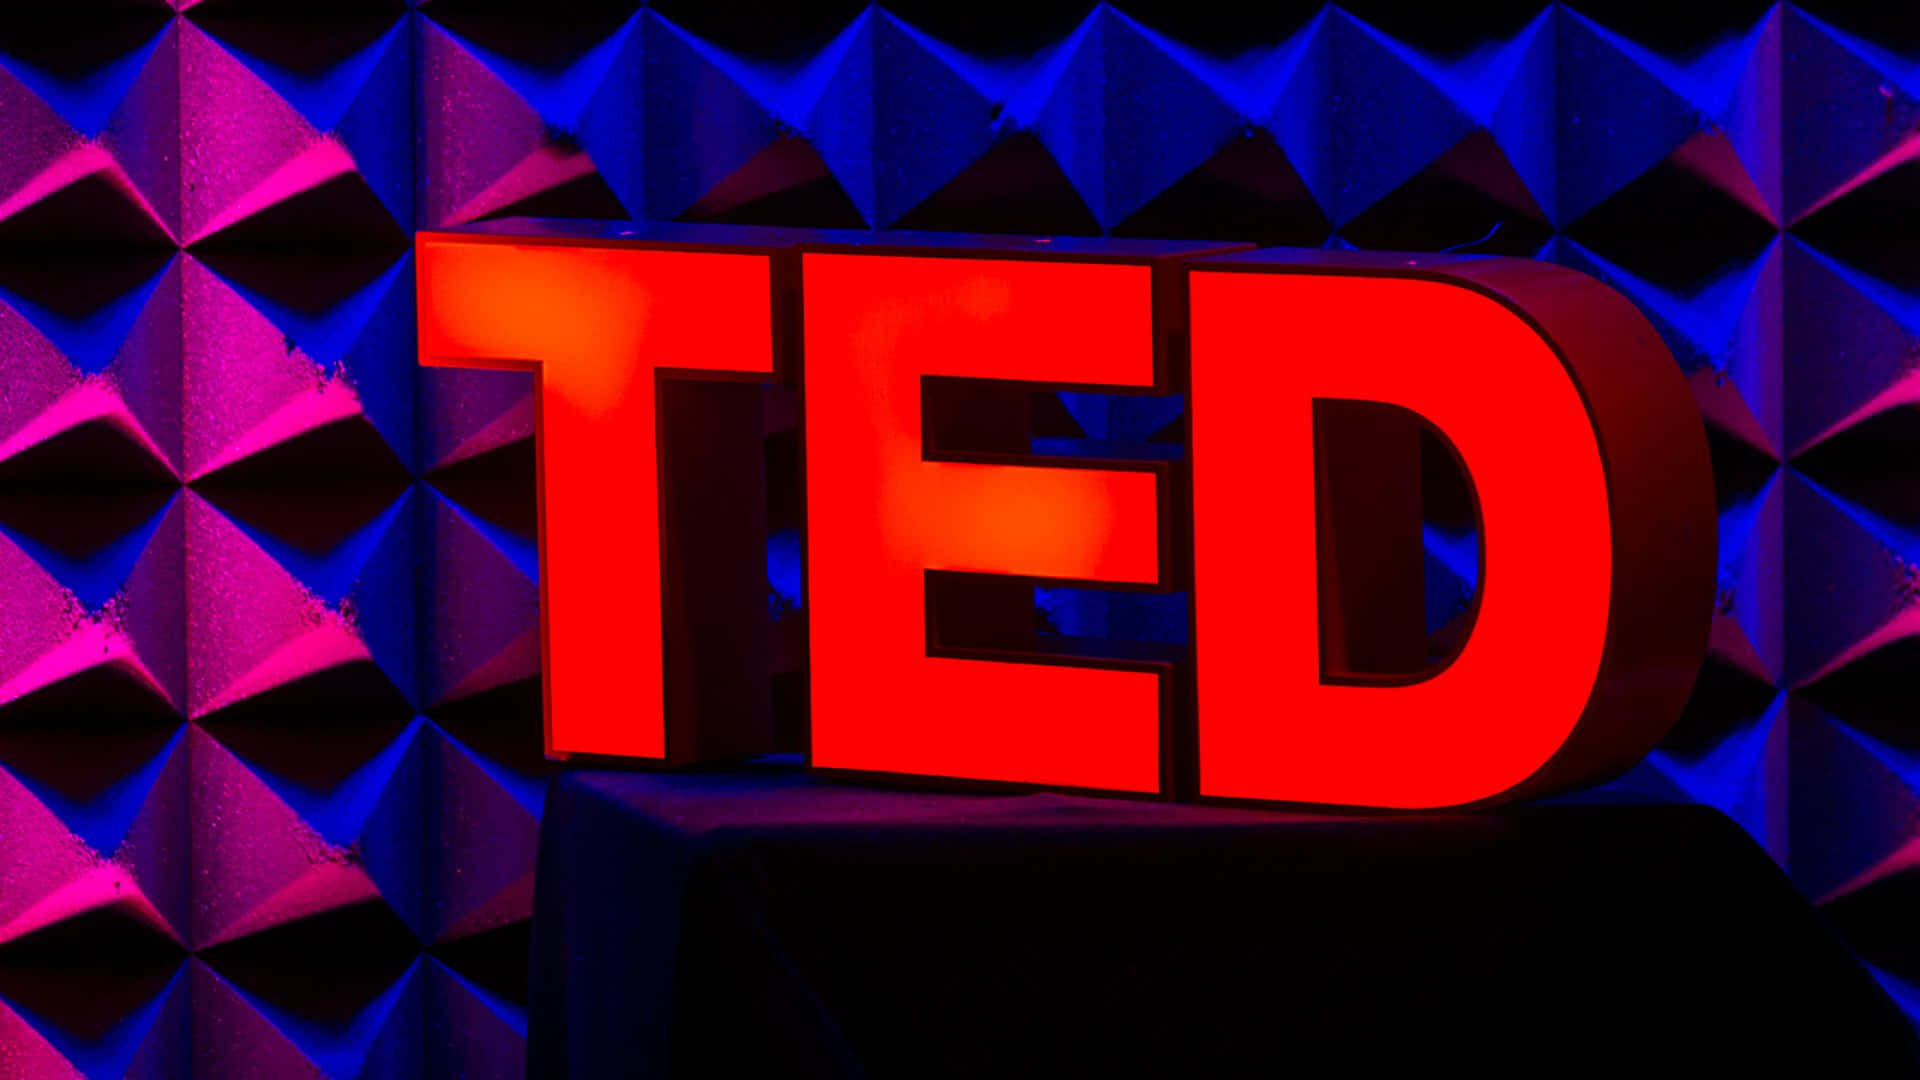 Ted Talk Background